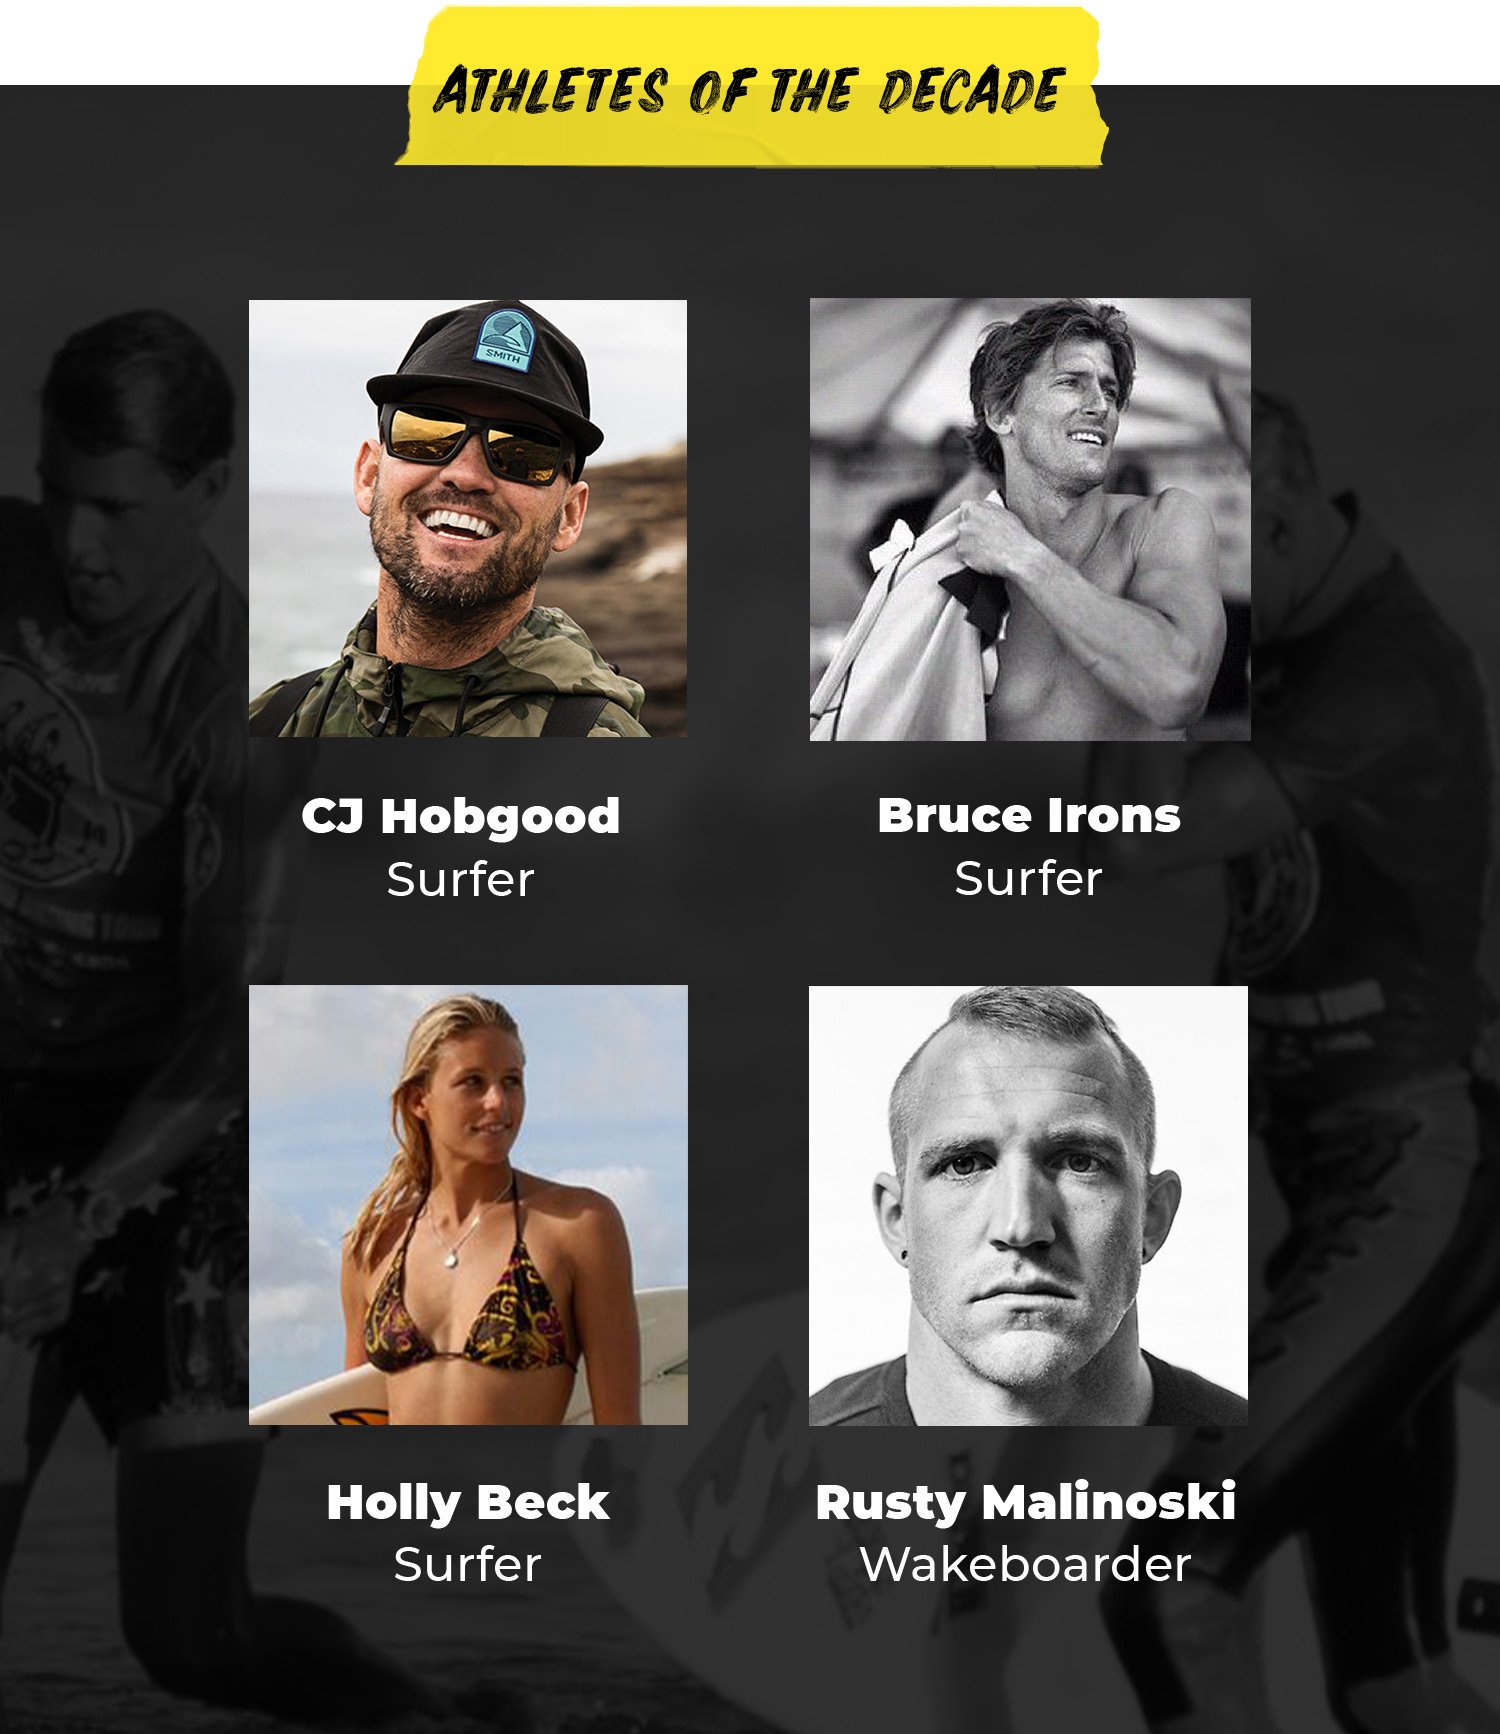 Athletes of the Decade | CJ Hobgood, Surfer | Bruce Irons, Surfer | Holly Beck, Surfer | Rusty Malinoski, Wakeboarder